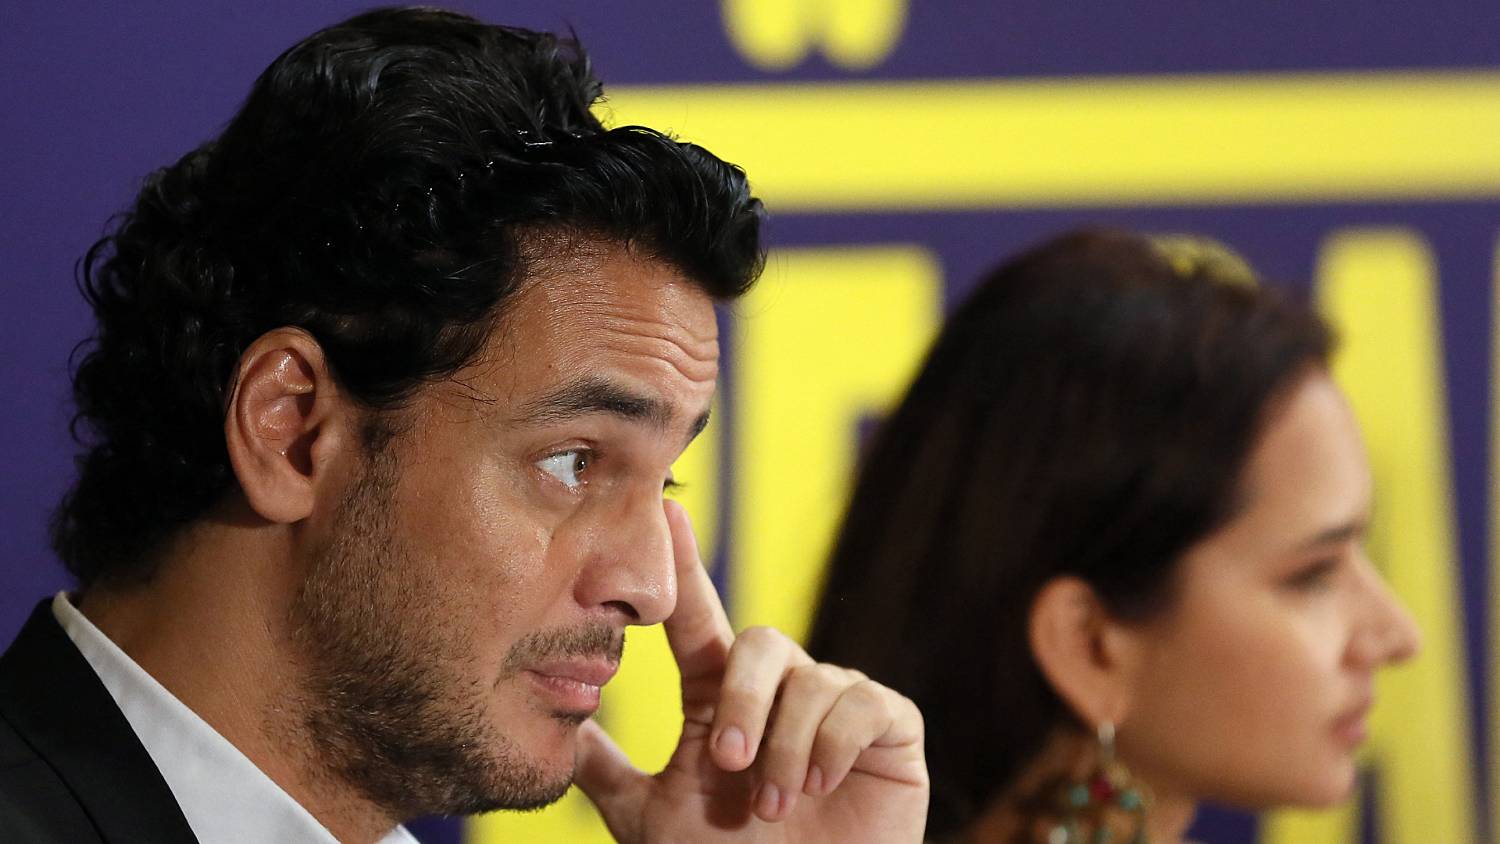 Actor Khaled Abol Naga left Egypt after a media attack on his personal life ensued (AFP)